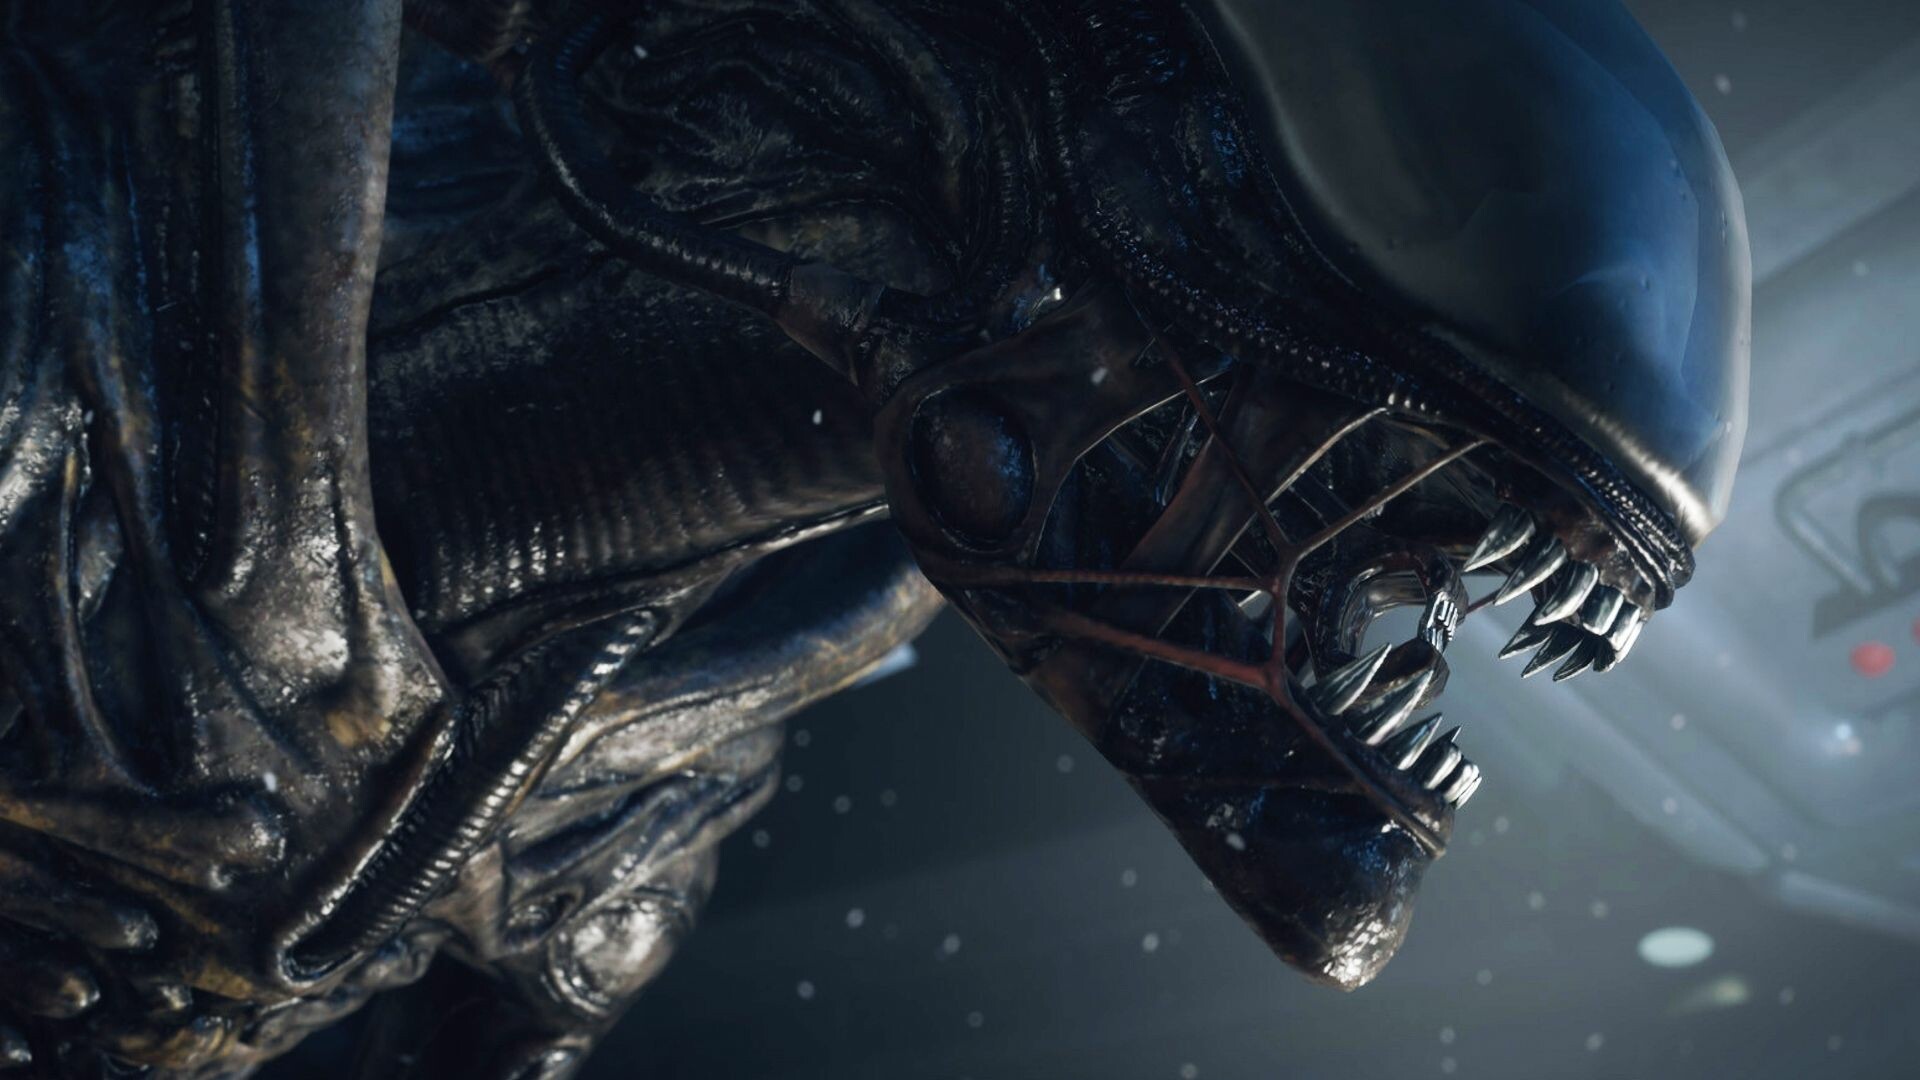 Alien (Movie): Produced and distributed by 20th Century Studios, the series began with 1979 movie. 1920x1080 Full HD Wallpaper.